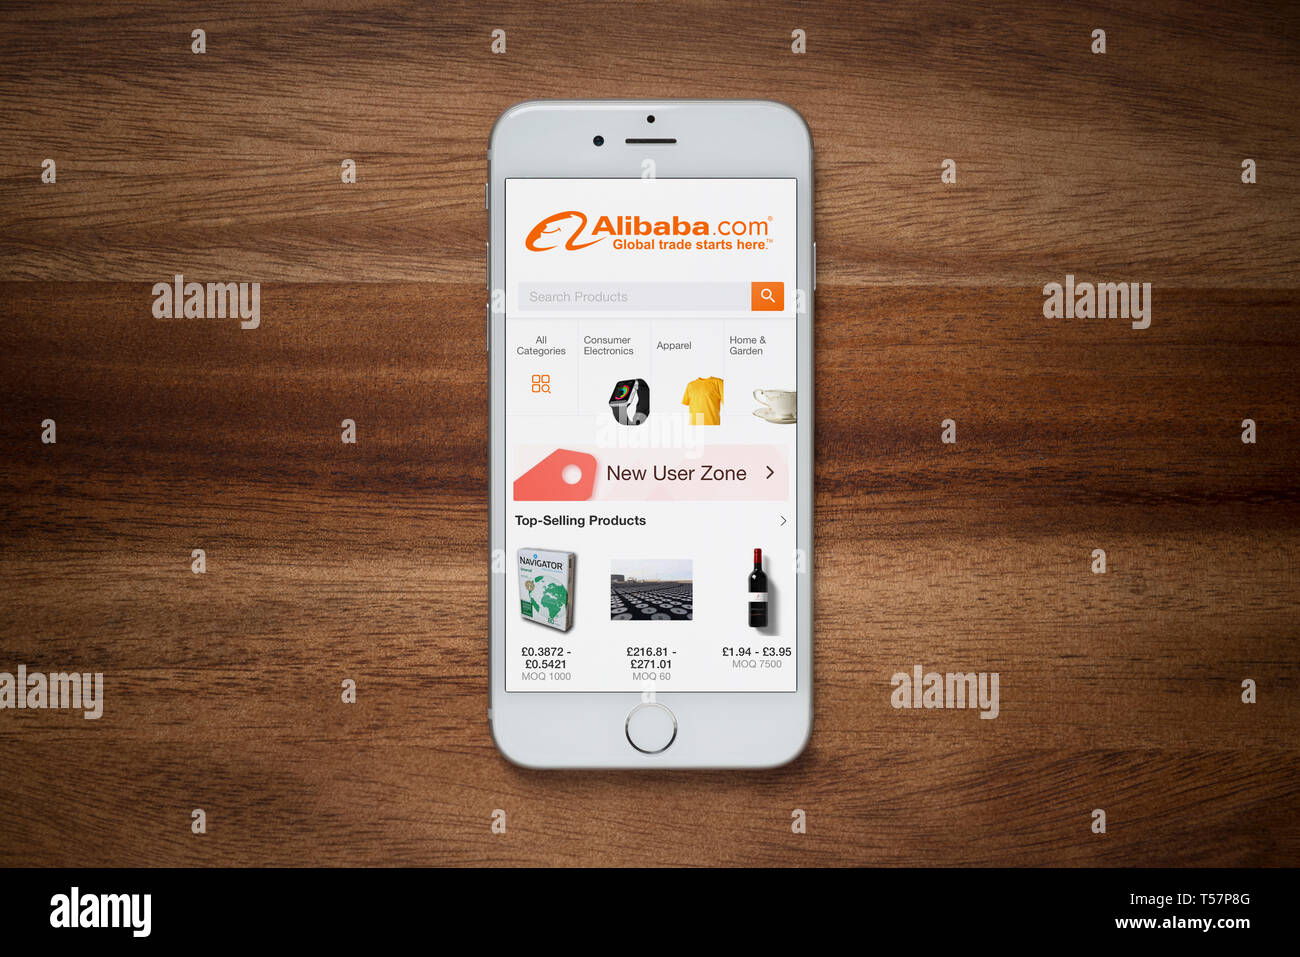 An iPhone showing the Alibaba website rests on a plain wooden table (Editorial use only). Stock Photo